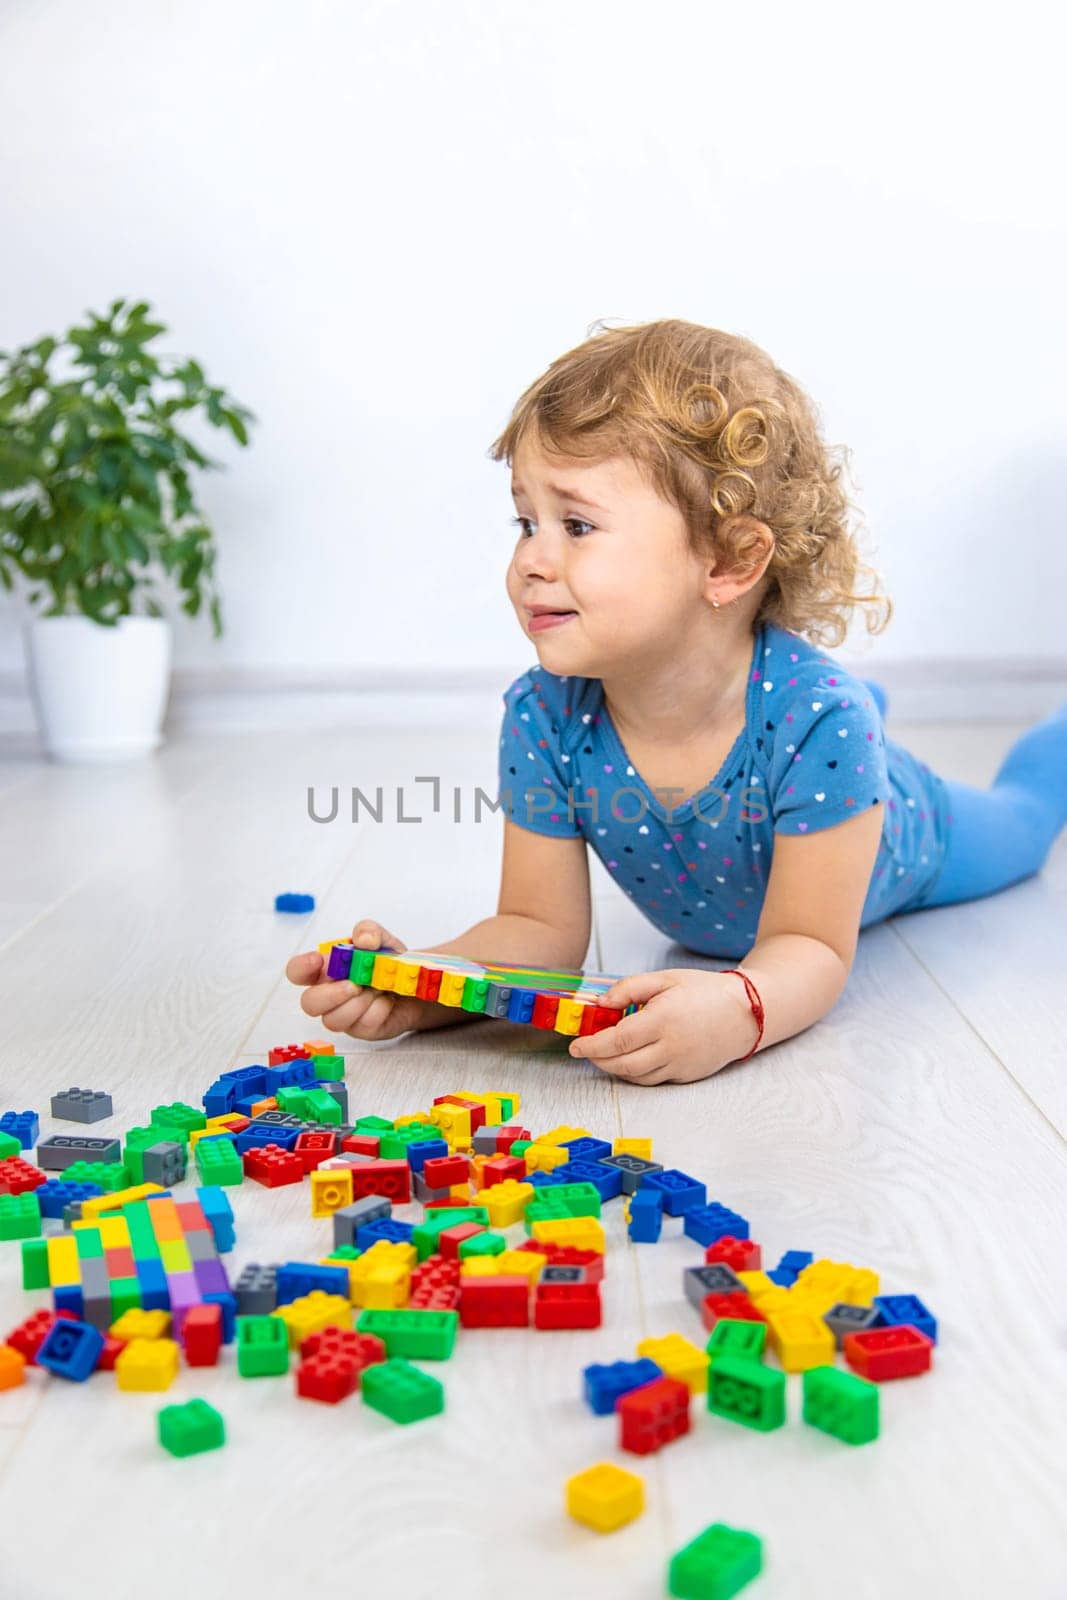 The child plays as a constructor. Selective focus. by yanadjana